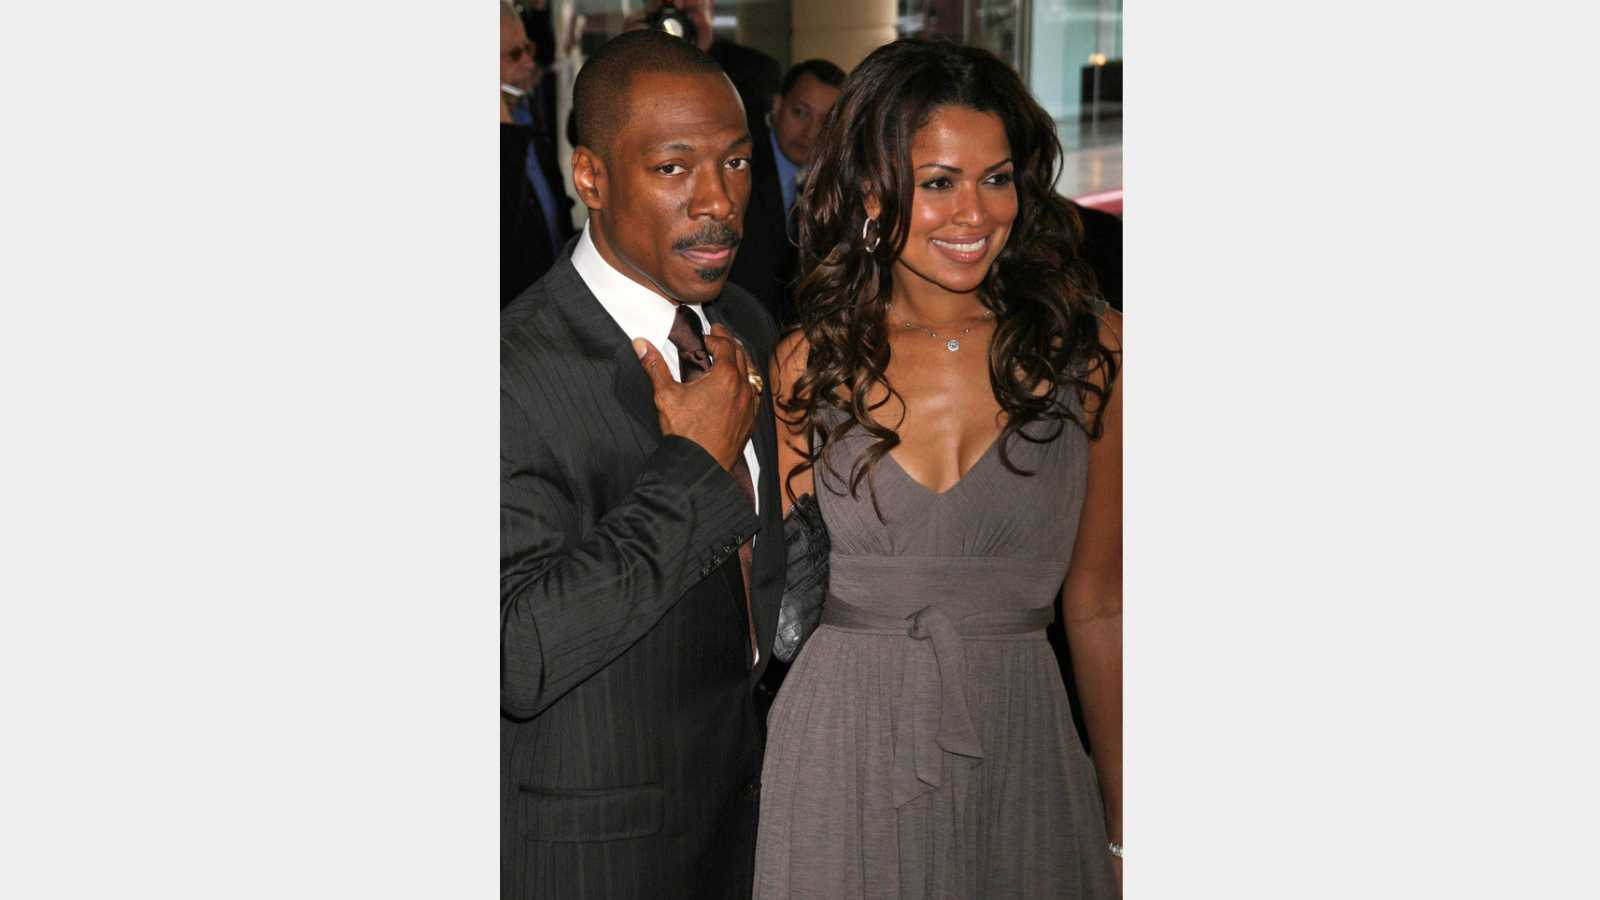 Eddie Murphy and Tracey Edmonds at the luncheon for the nominees of the 79th Annual Academy Awards. Beverly Hilton Hotel, Beverly Hills, Ca. 02-05-07